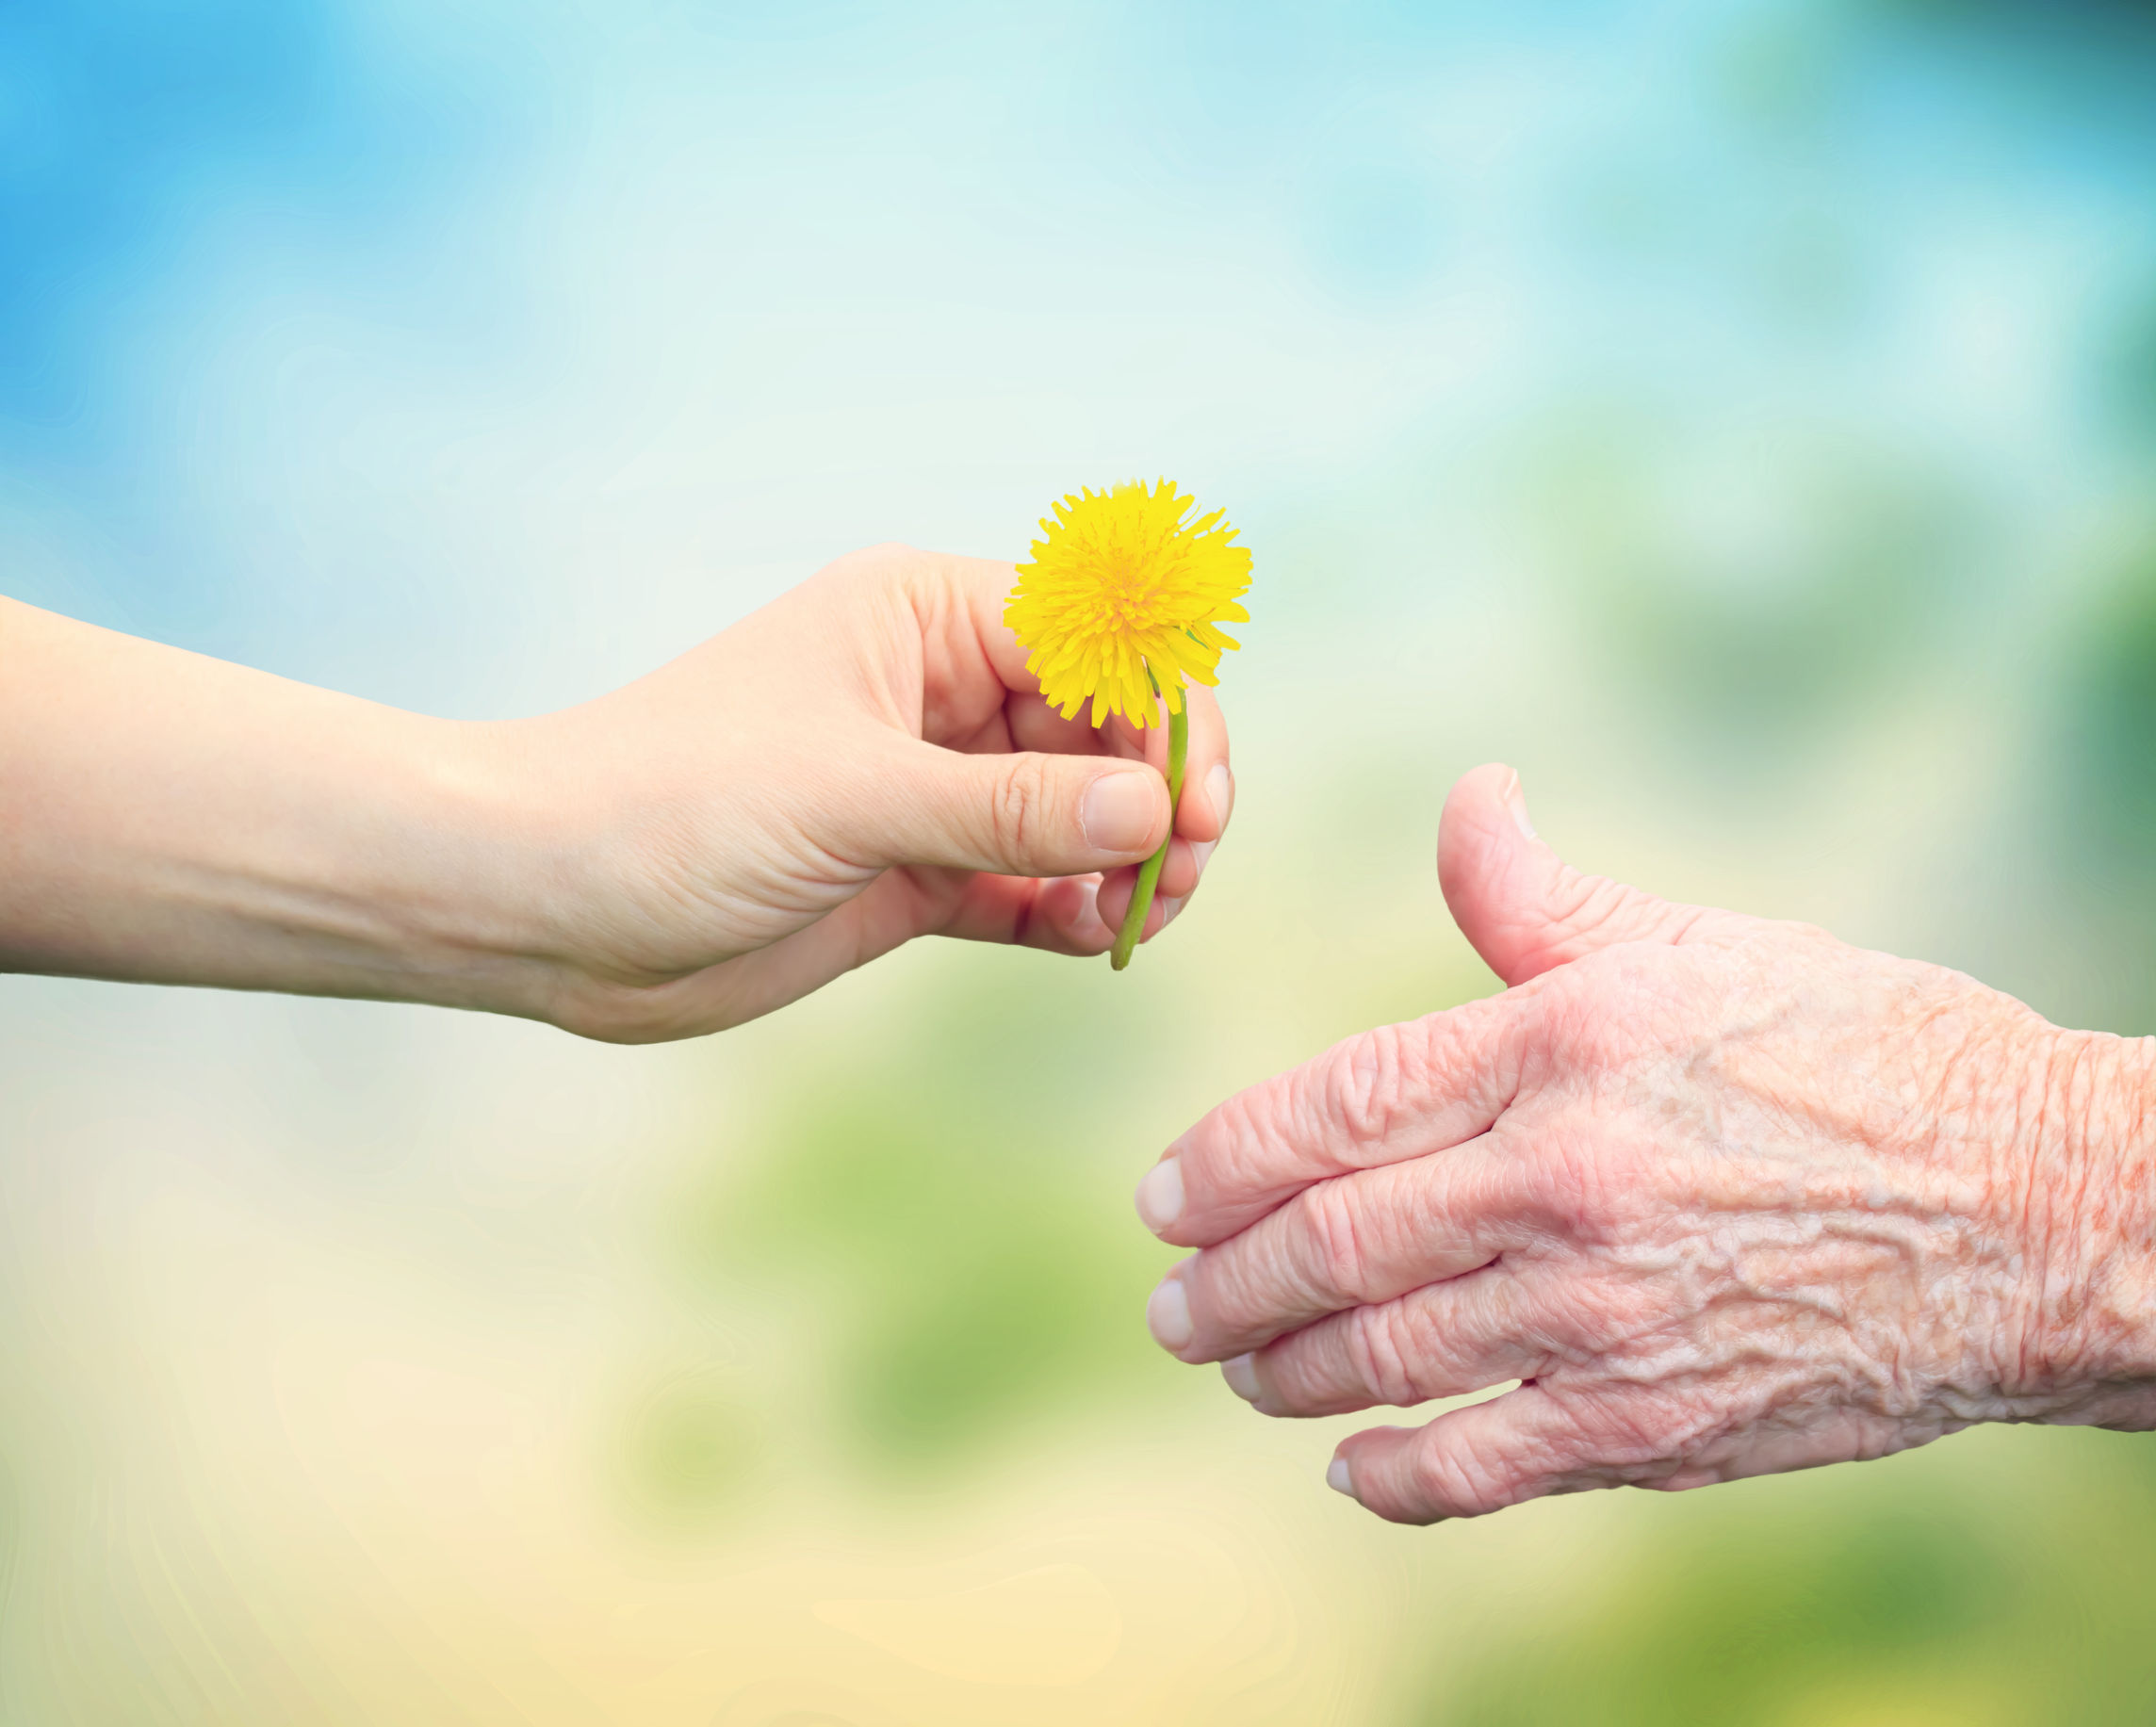 Close-up of the hand of an elderly person receiving a yellow flower